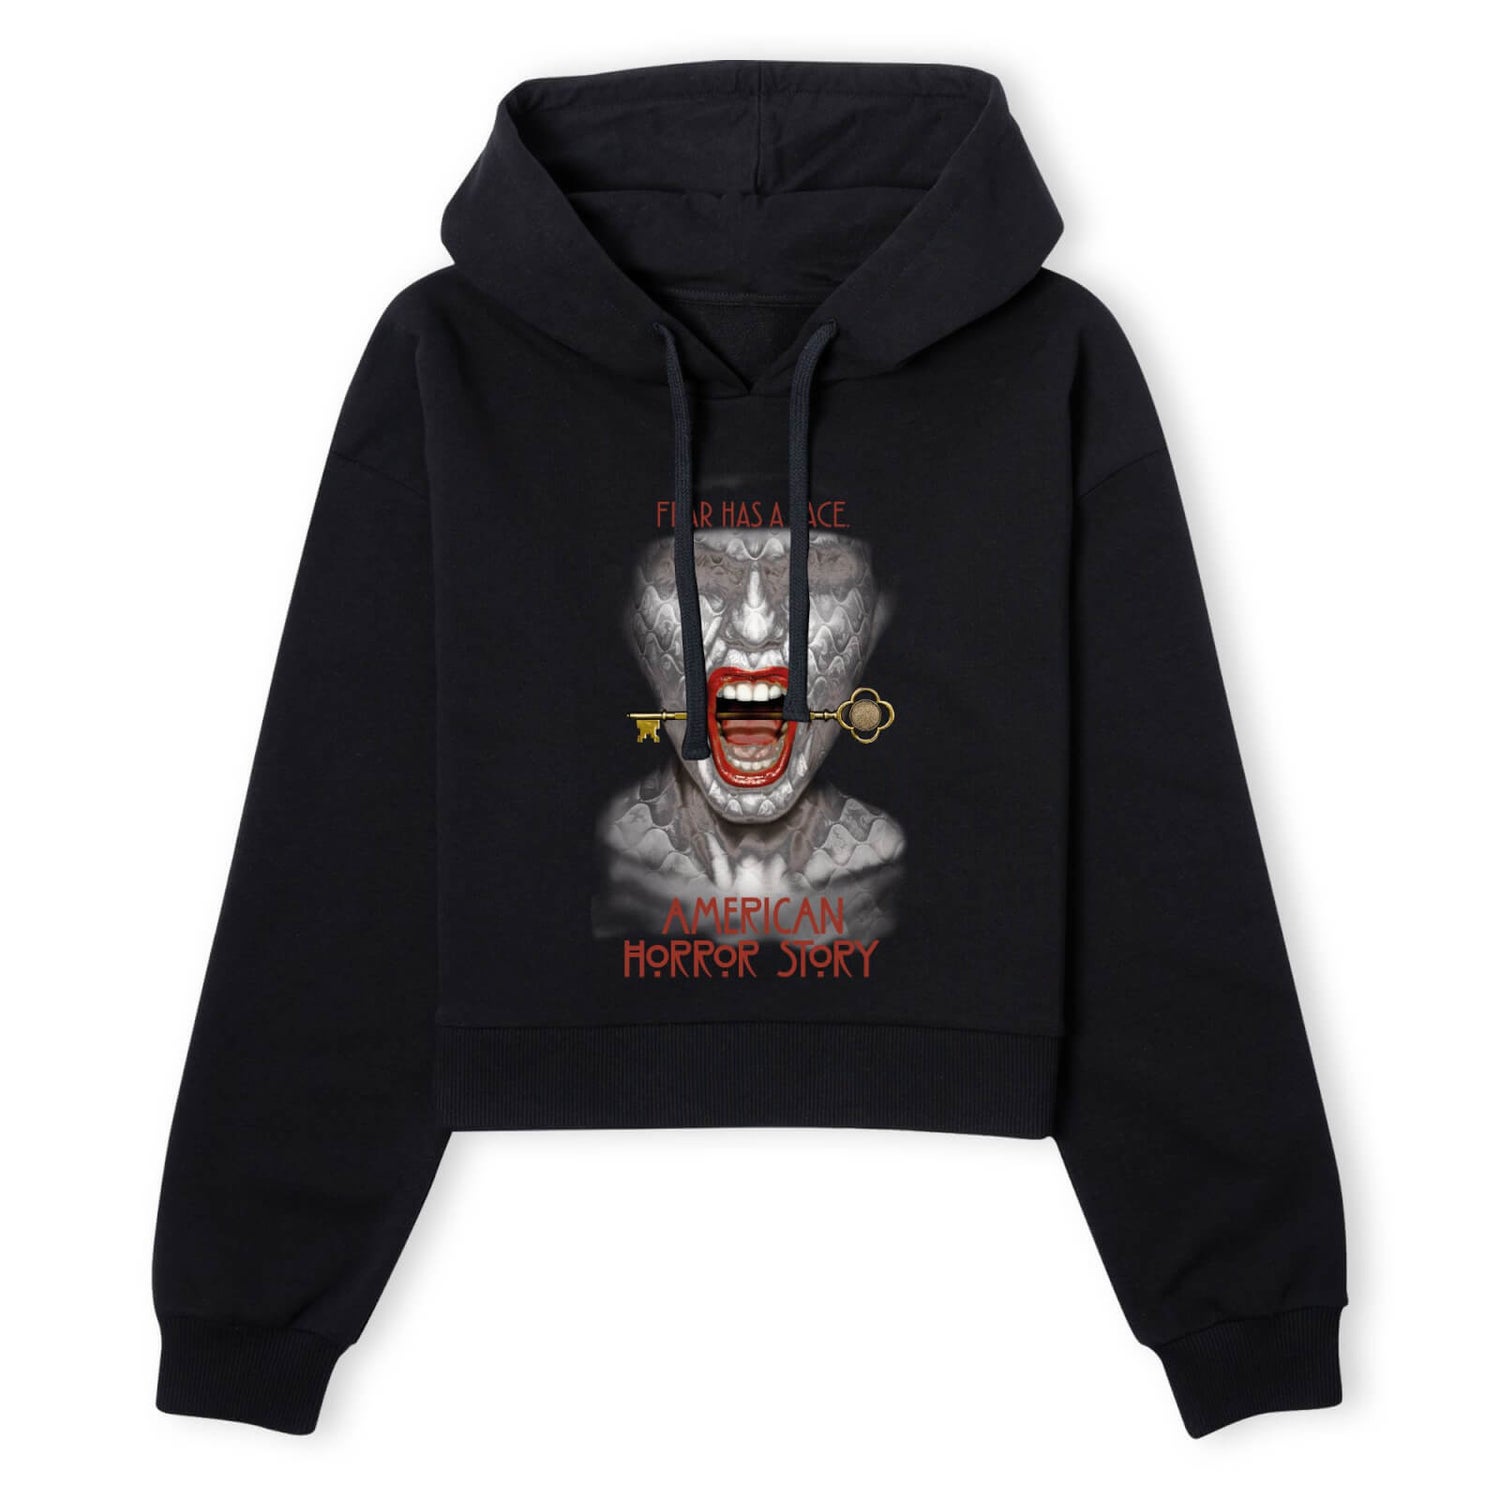 American Horror Story Fear Has A Face Women's Cropped Hoodie - Black